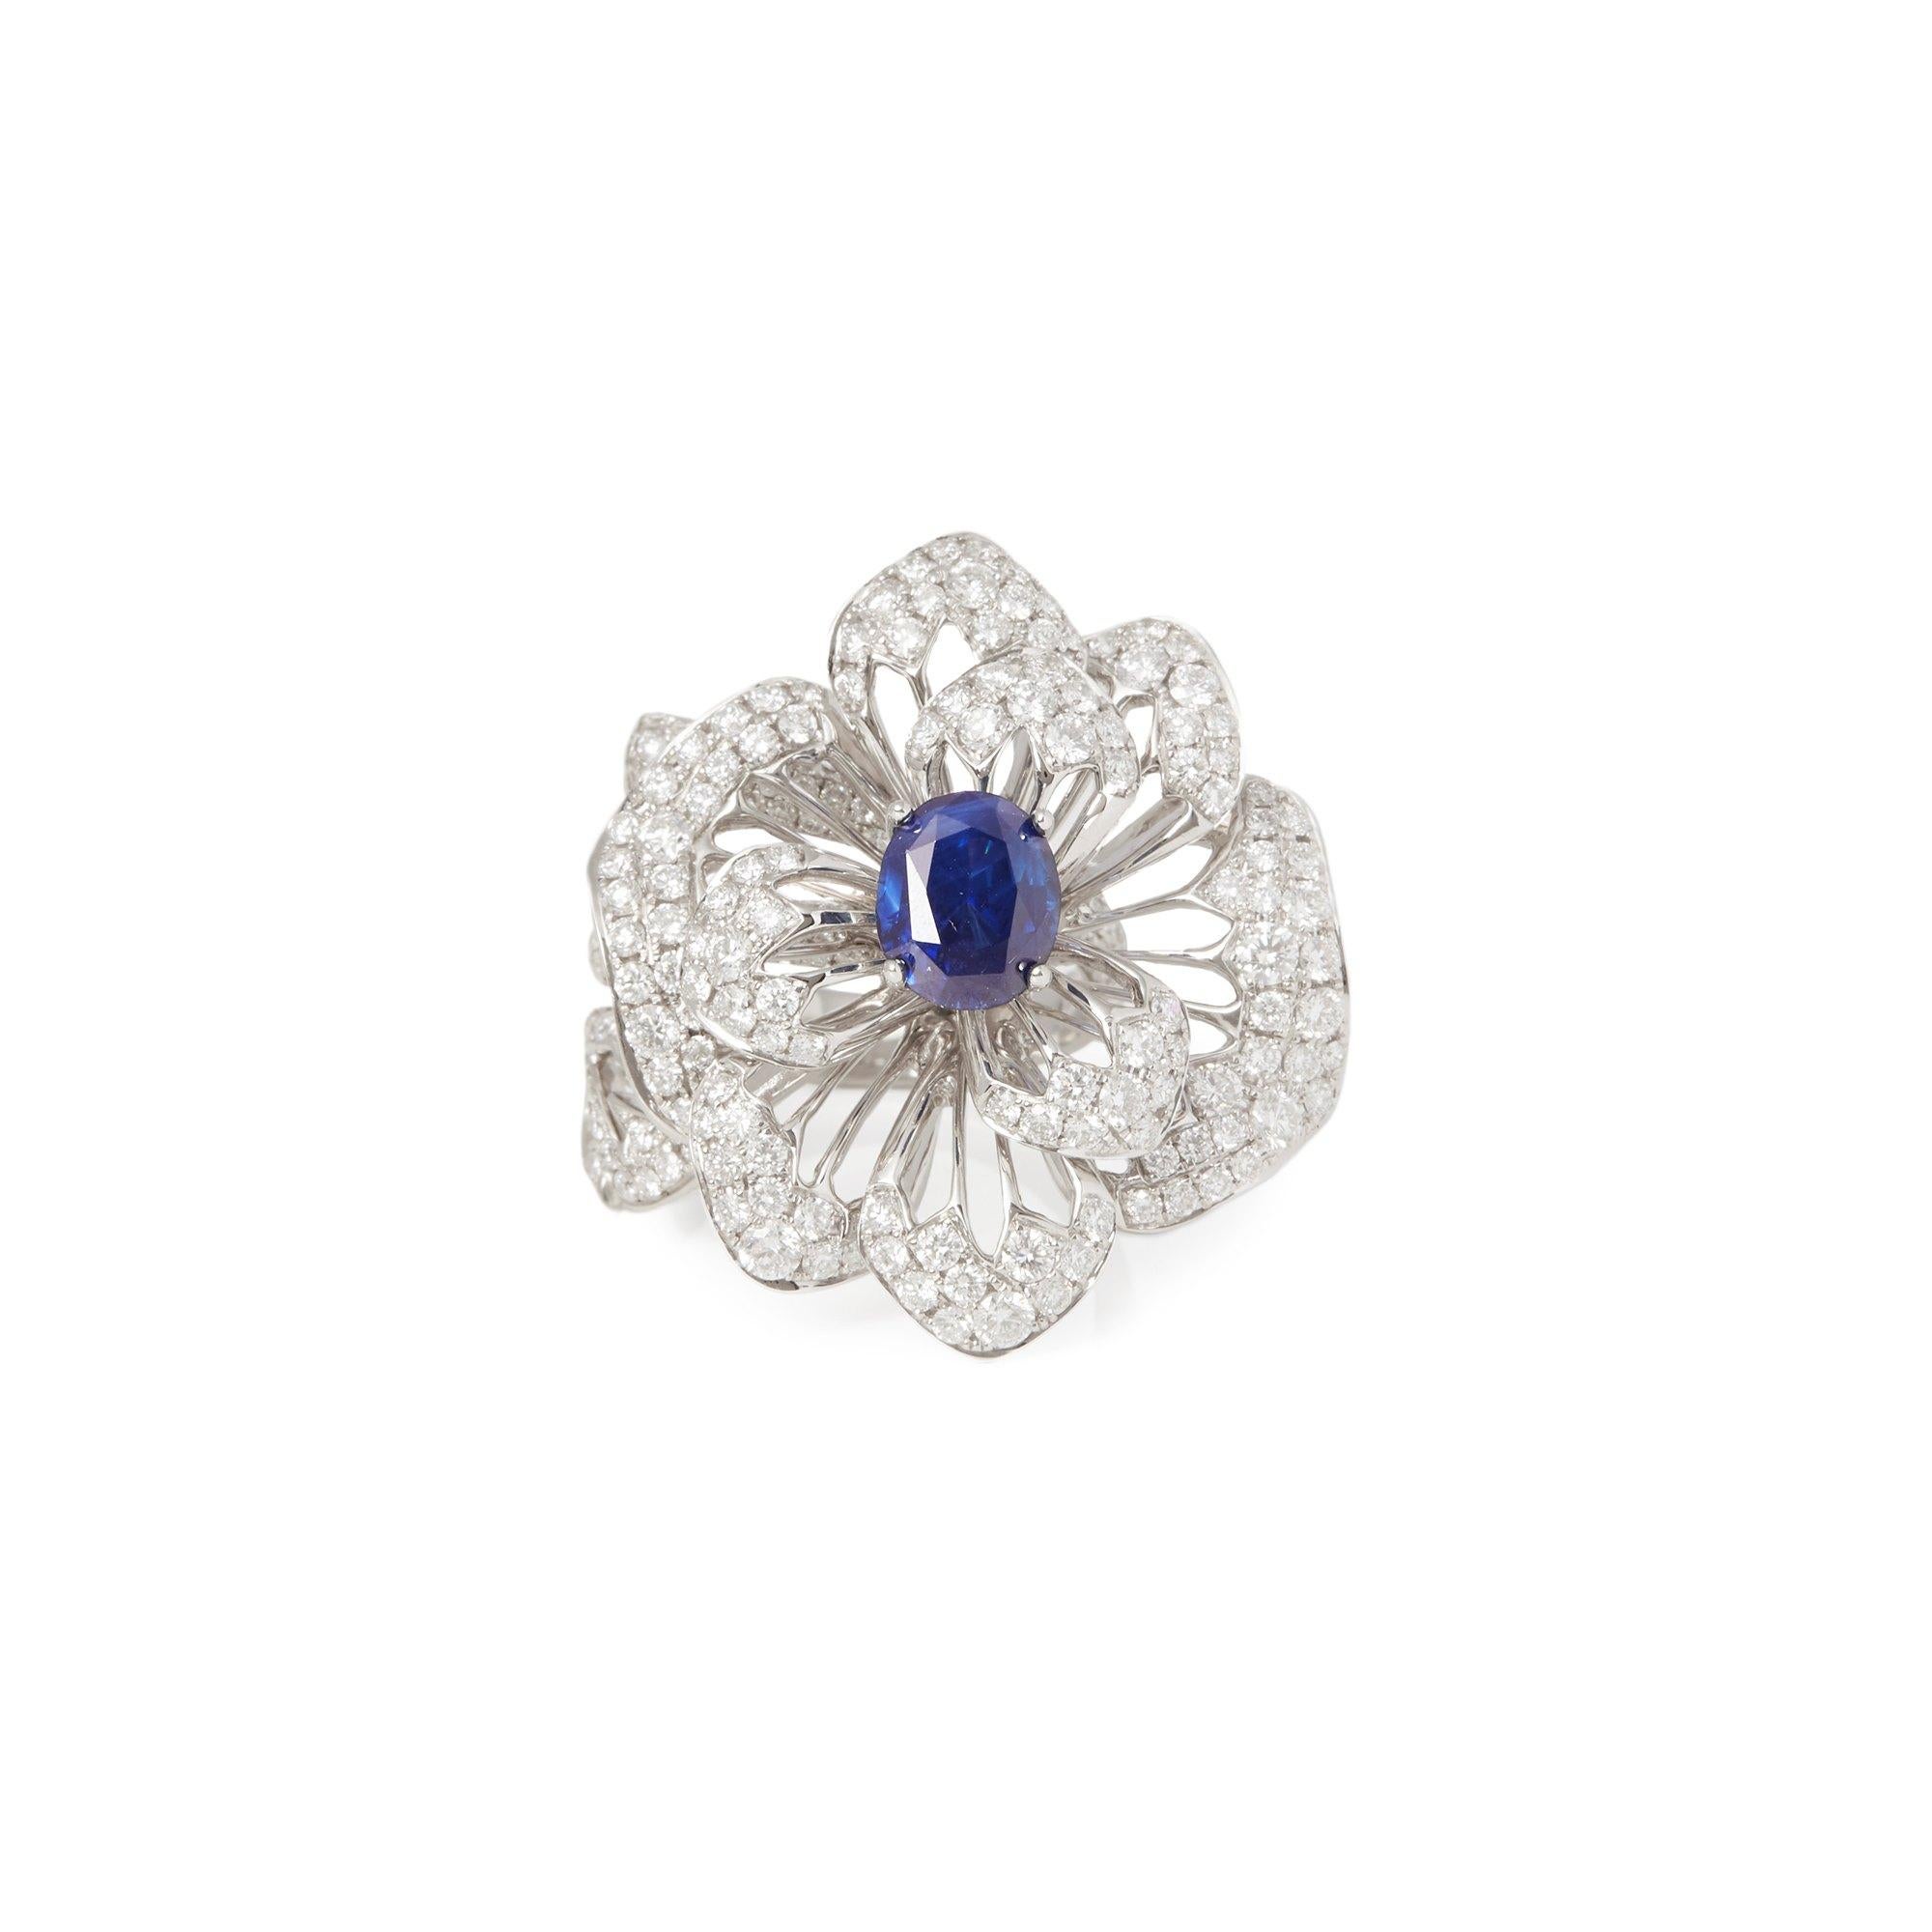 This ring designed by David Jerome is from his private collection and features one oval cut Sapphire totalling 2.84cts sourced in Sri Lanka. Set with round brilliant cut Diamonds totalling 3.35cts mounted in an 18k white gold setting. Finger size UK